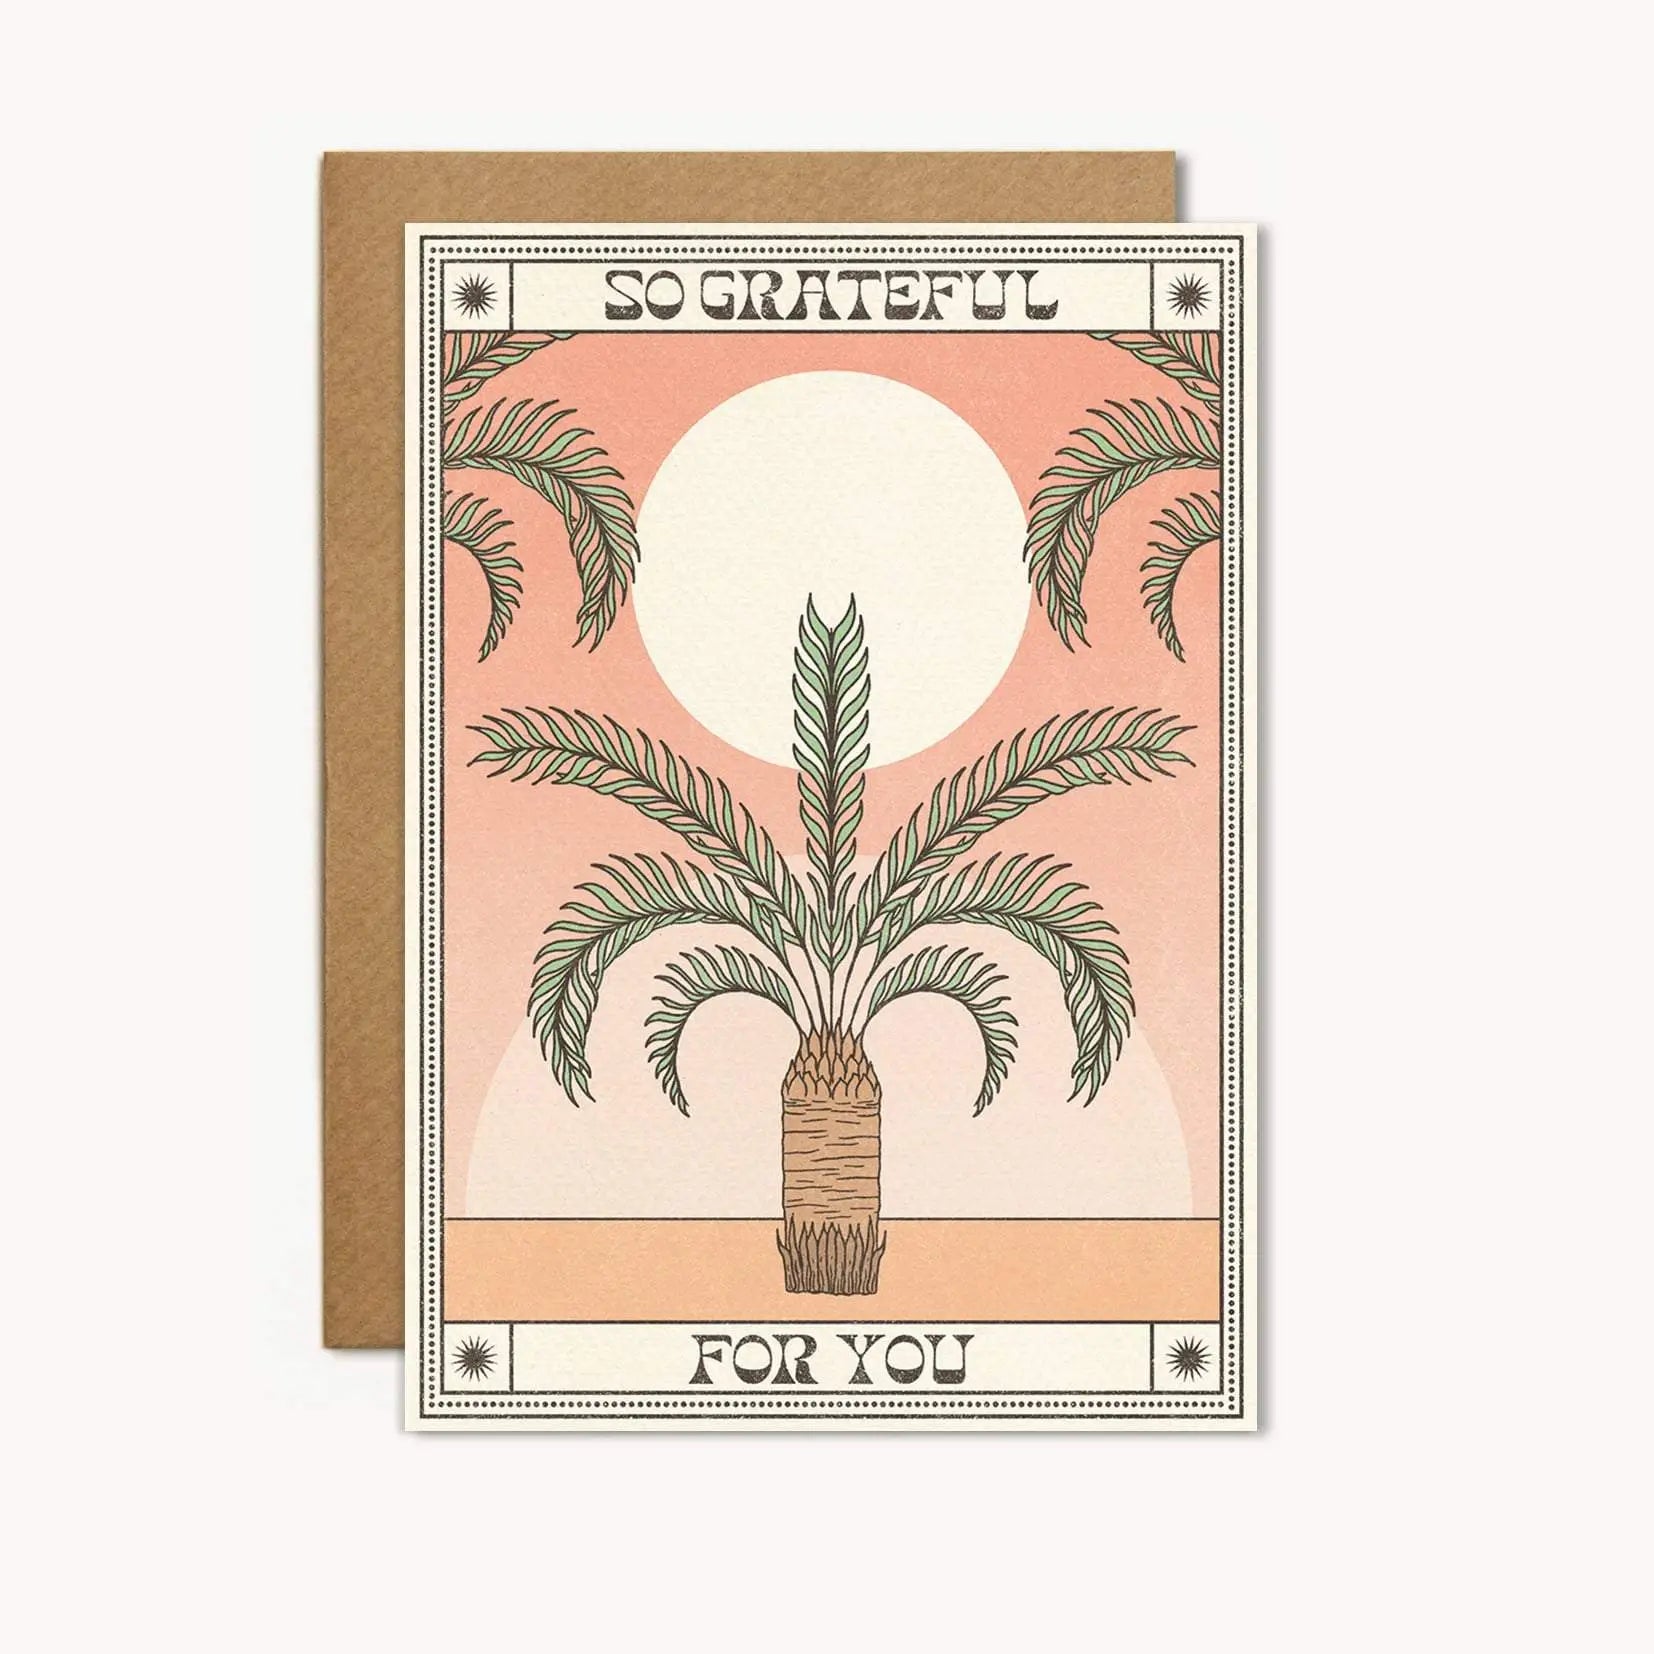 So Grateful For You - Greeting Card